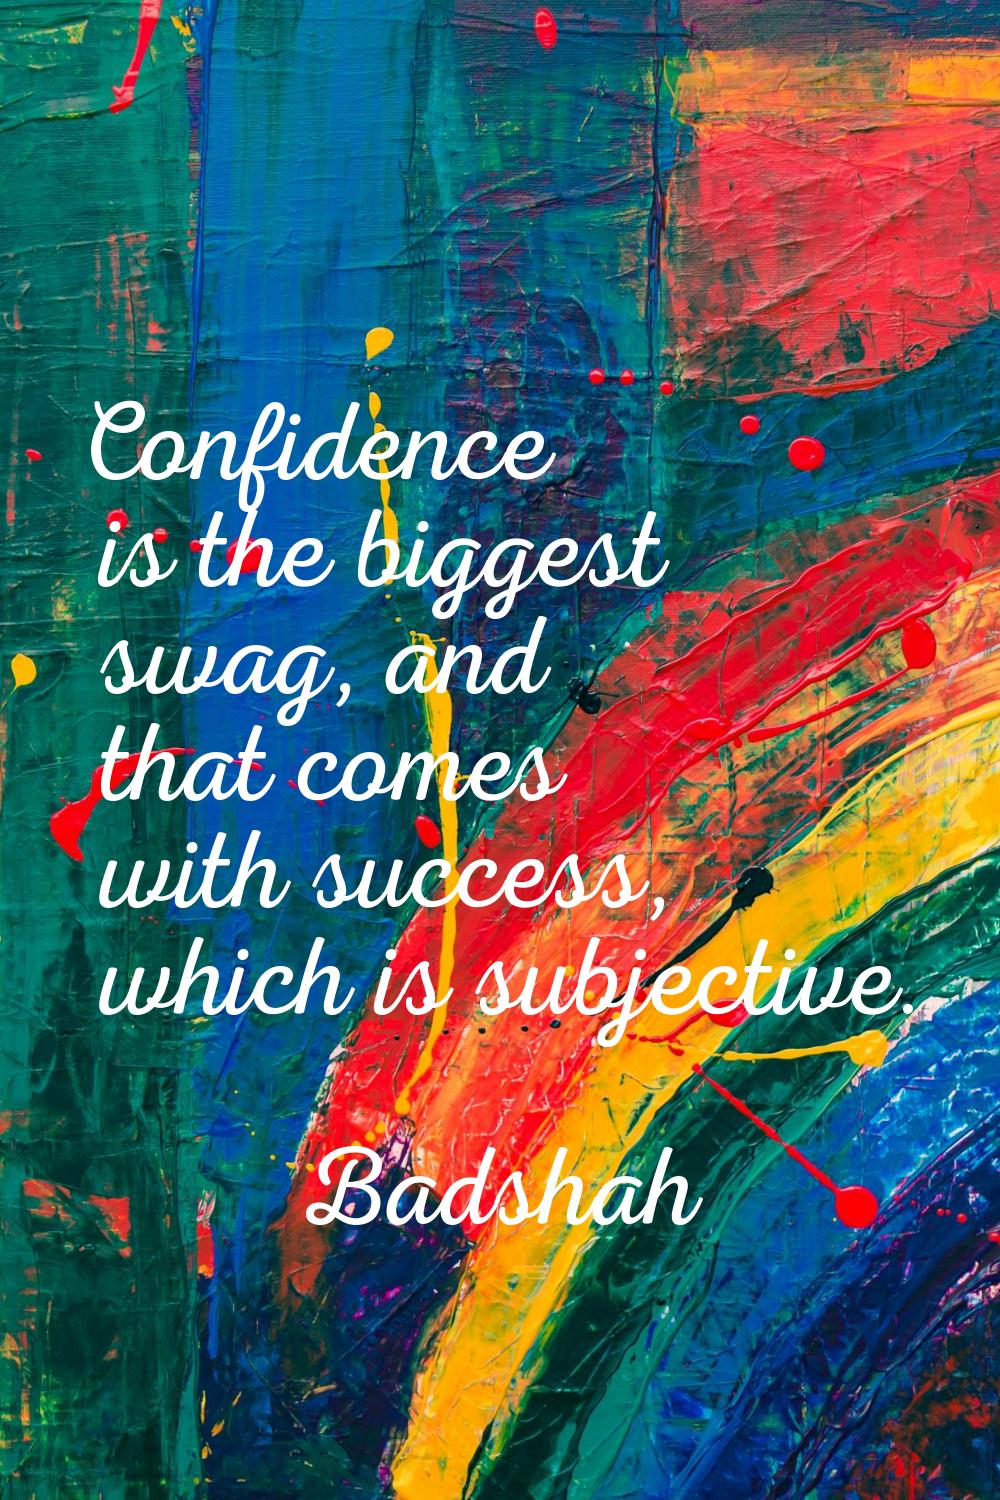 Confidence is the biggest swag, and that comes with success, which is subjective.